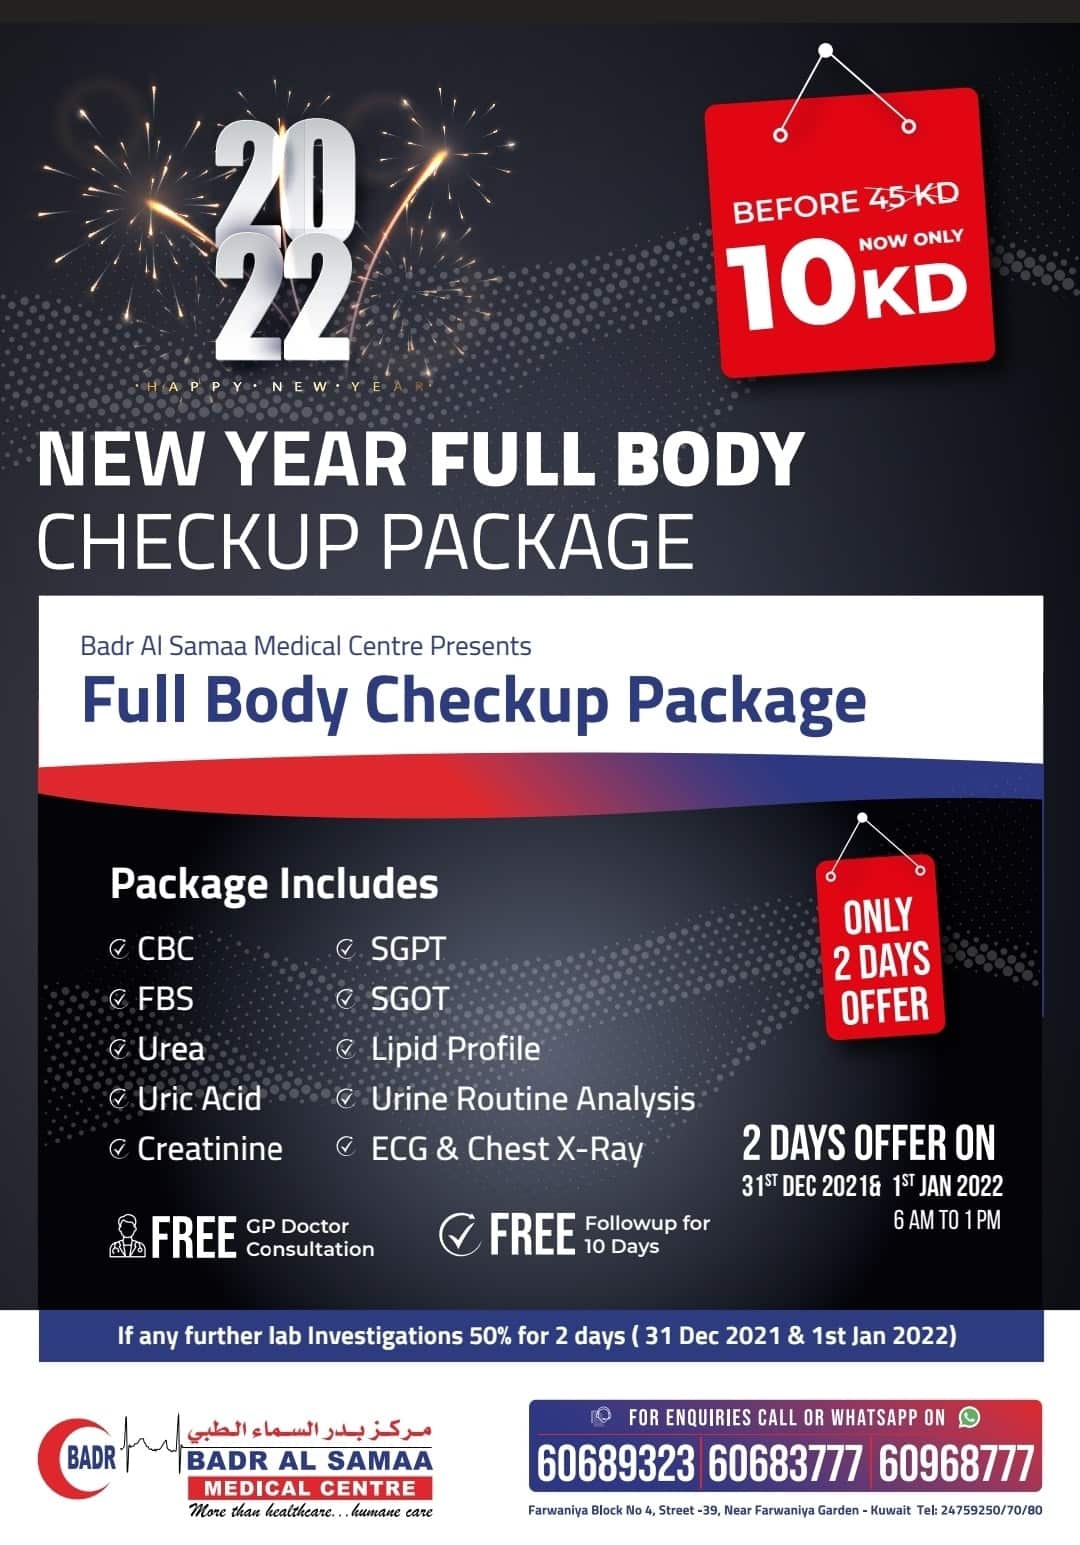 New Year Full Body Checkup Package for 10 KD, iiQ8, Badr Medical Center Offers 1